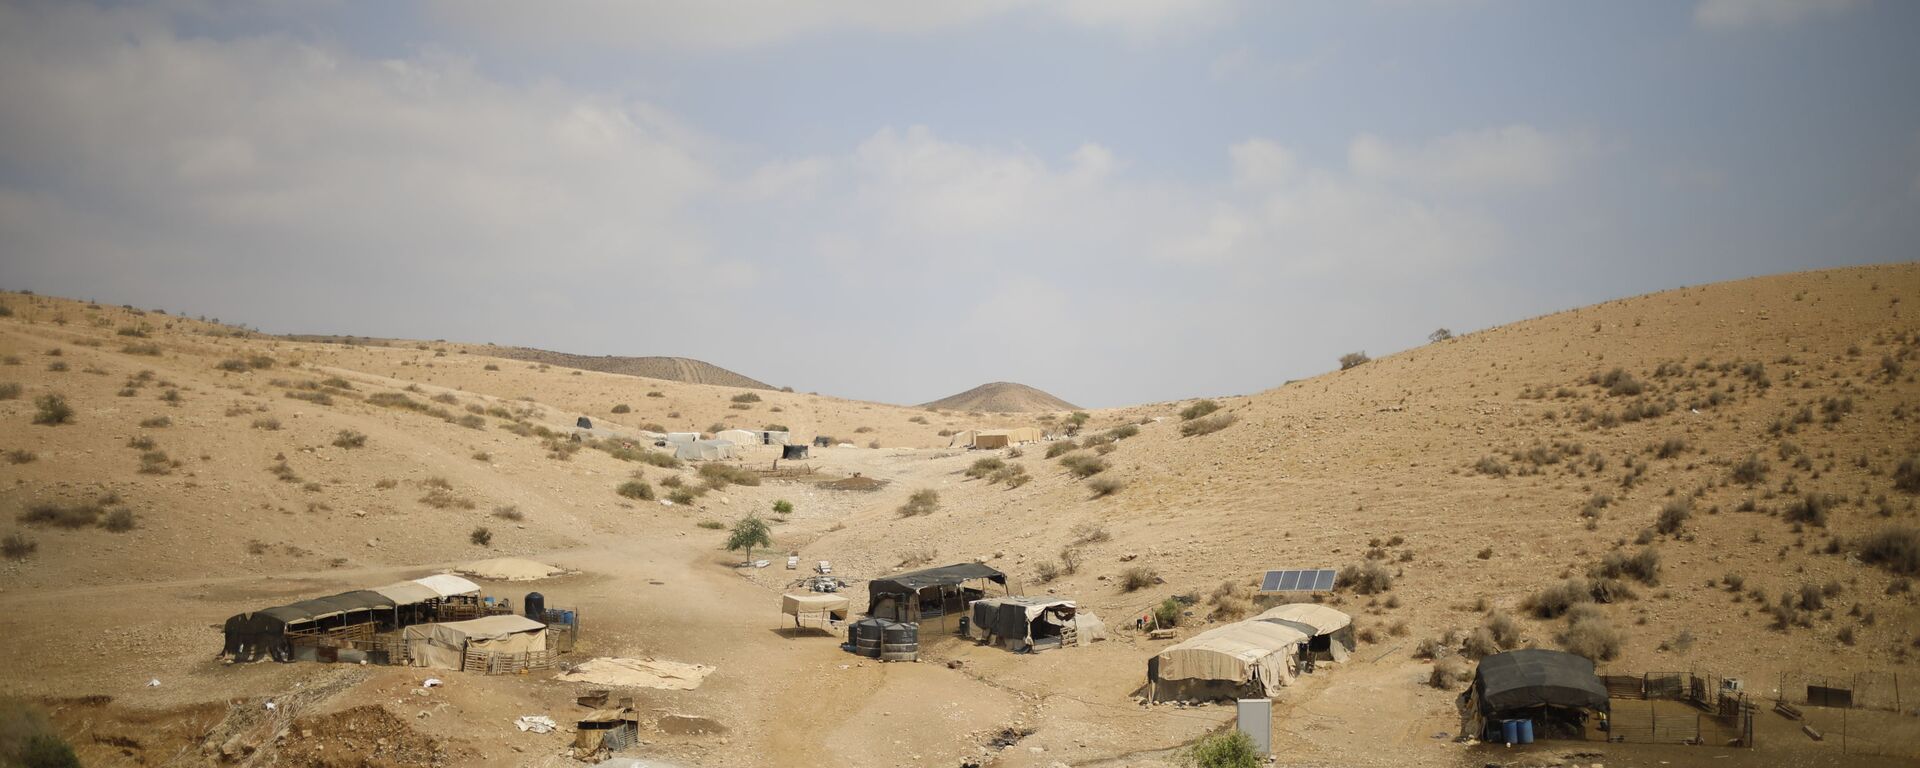 Palestinian Bedouin homes are seen in the Israeli-occupied West Bank, Wednesday, Sept. 11, 2019. Israeli Prime Minister Benjamin Netanyahu’s election eve vow to annex the Jordan Valley if he is re-elected has sparked an angry Arab rebuke and injected the Palestinians into a campaign that had almost entirely ignored them. (AP Photo/Ariel Schalit) - Sputnik International, 1920, 26.11.2020